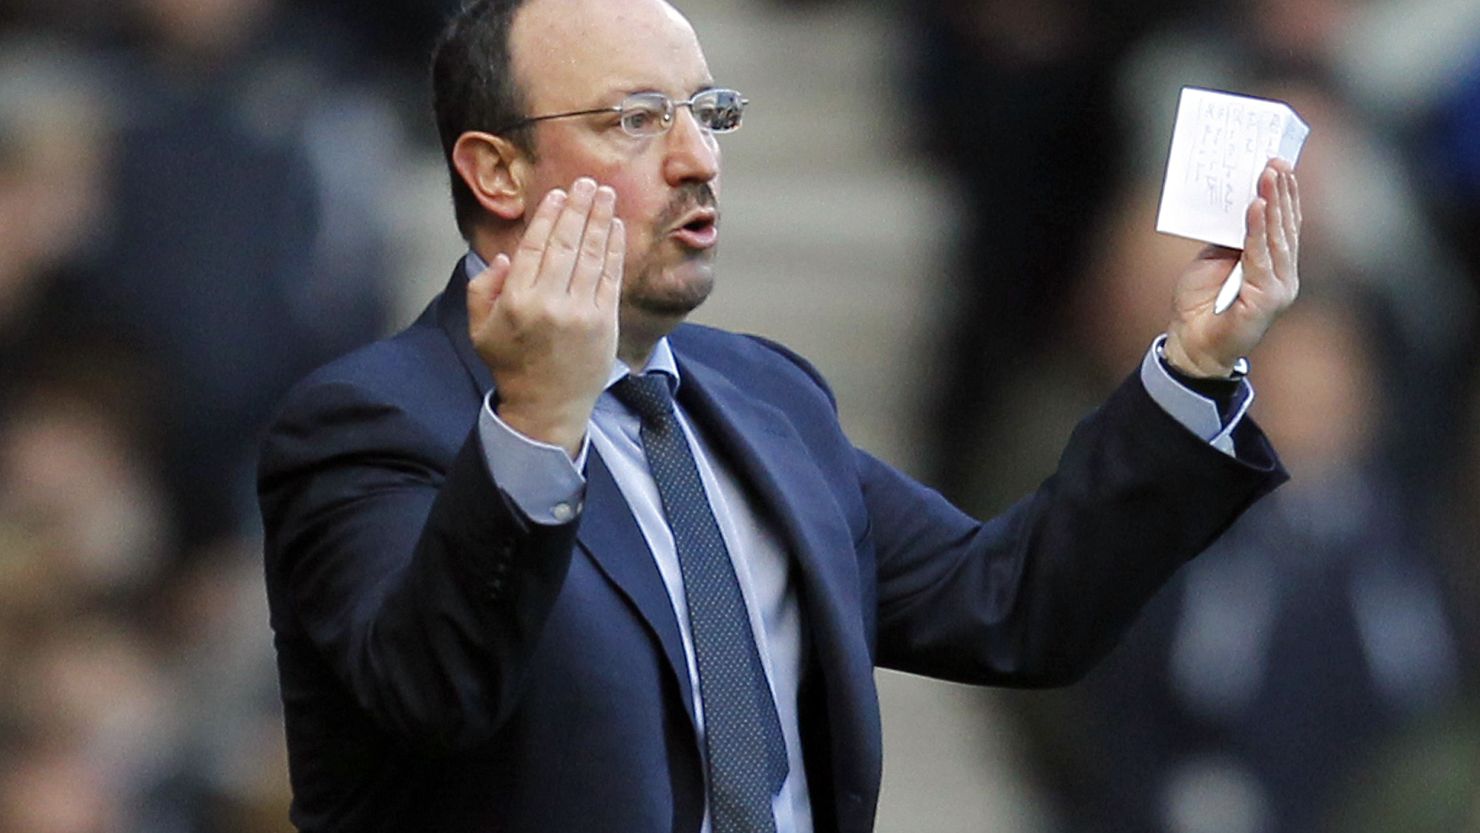 Rafael Benitez continues to feel the heat from Chelsea fans after another disappointing performance against West Ham.